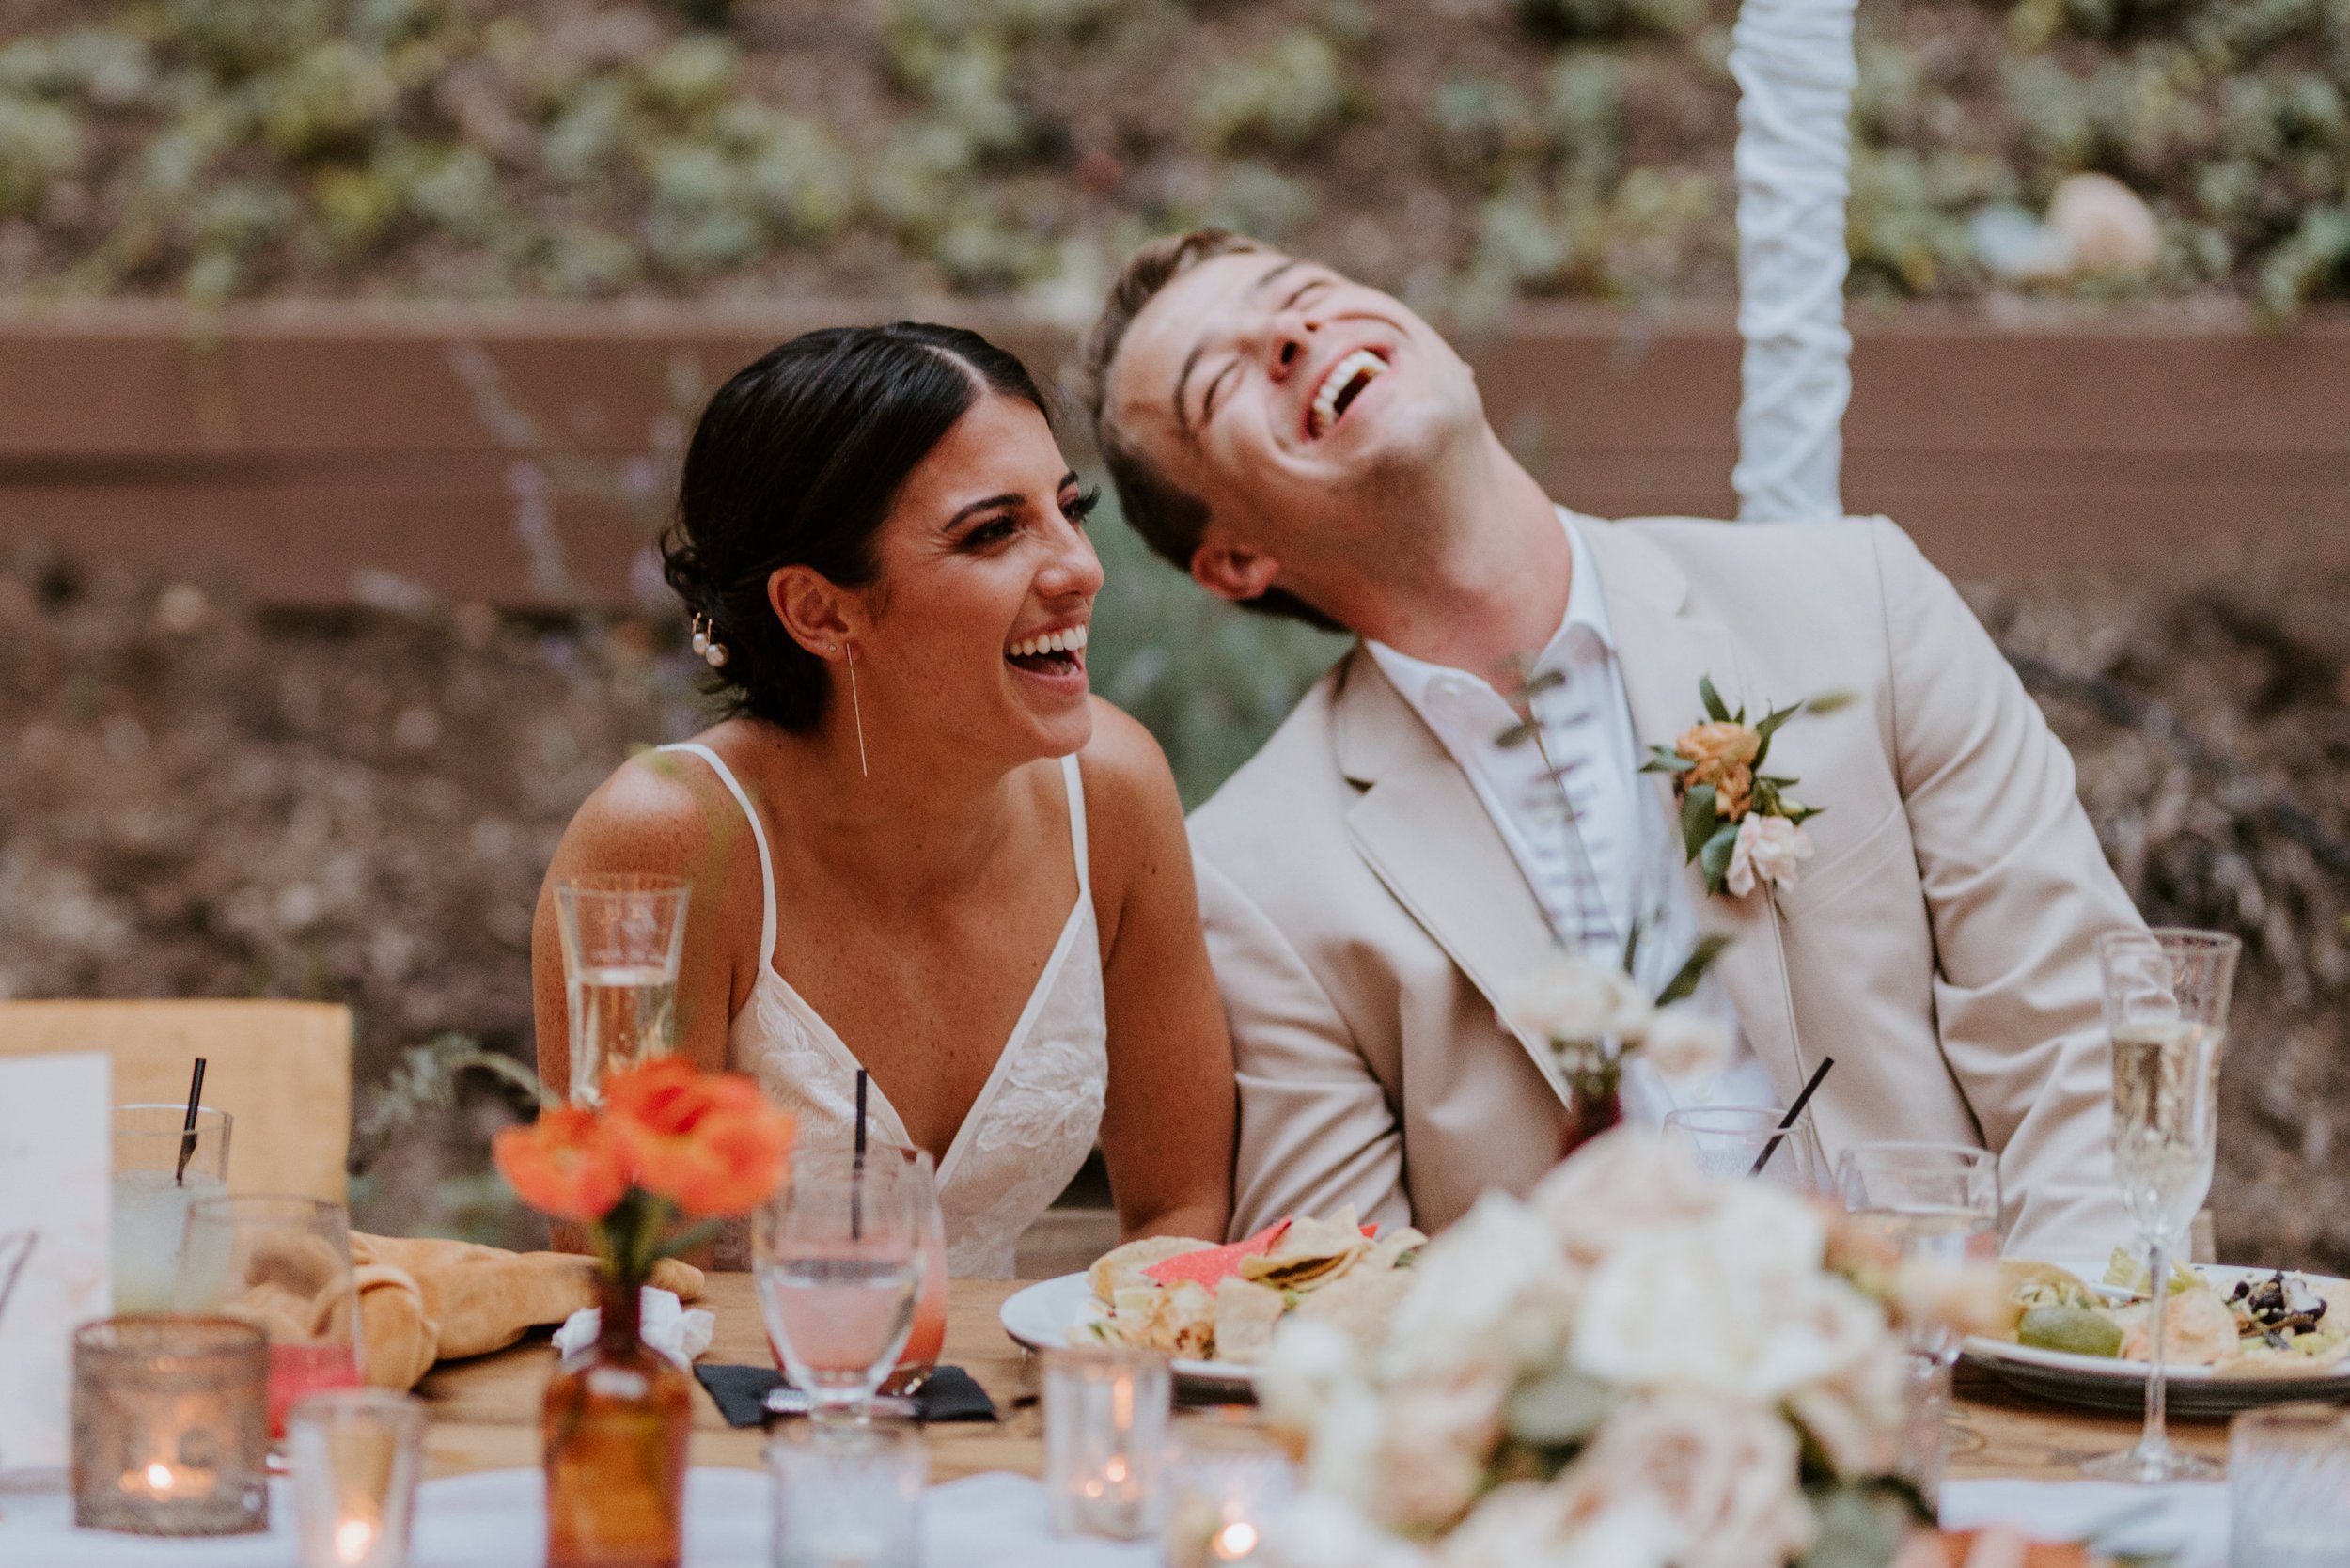 Candid emotional wedding photography, Castle in the Forest Lake Arrowhead airbnb wedding, Photo by Tida Svy